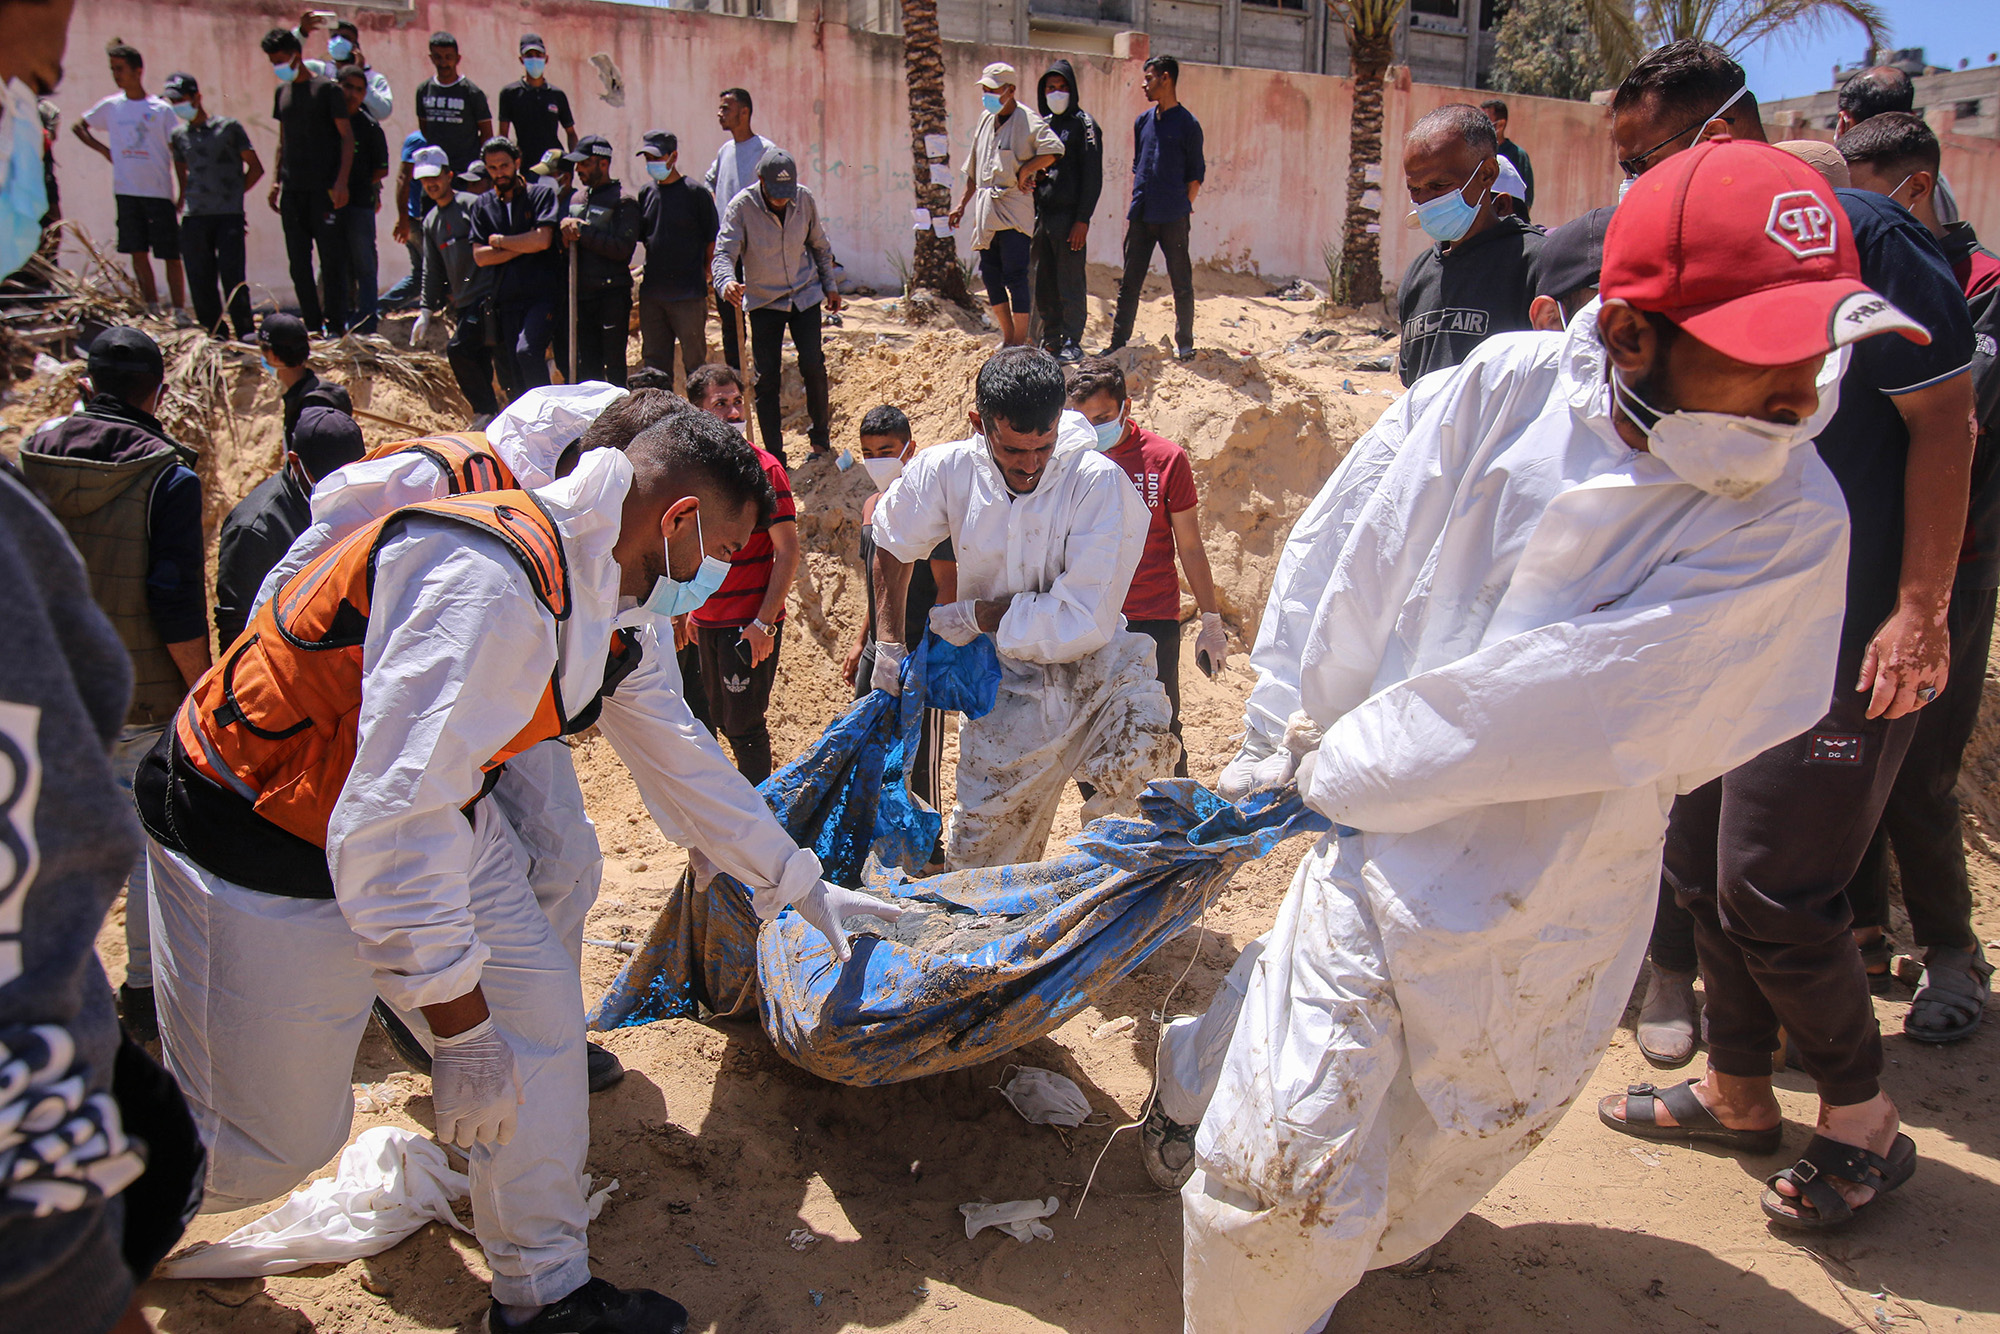 More than 200 bodies found in mass grave in Nasser hospital, says Gaza Civil Defense